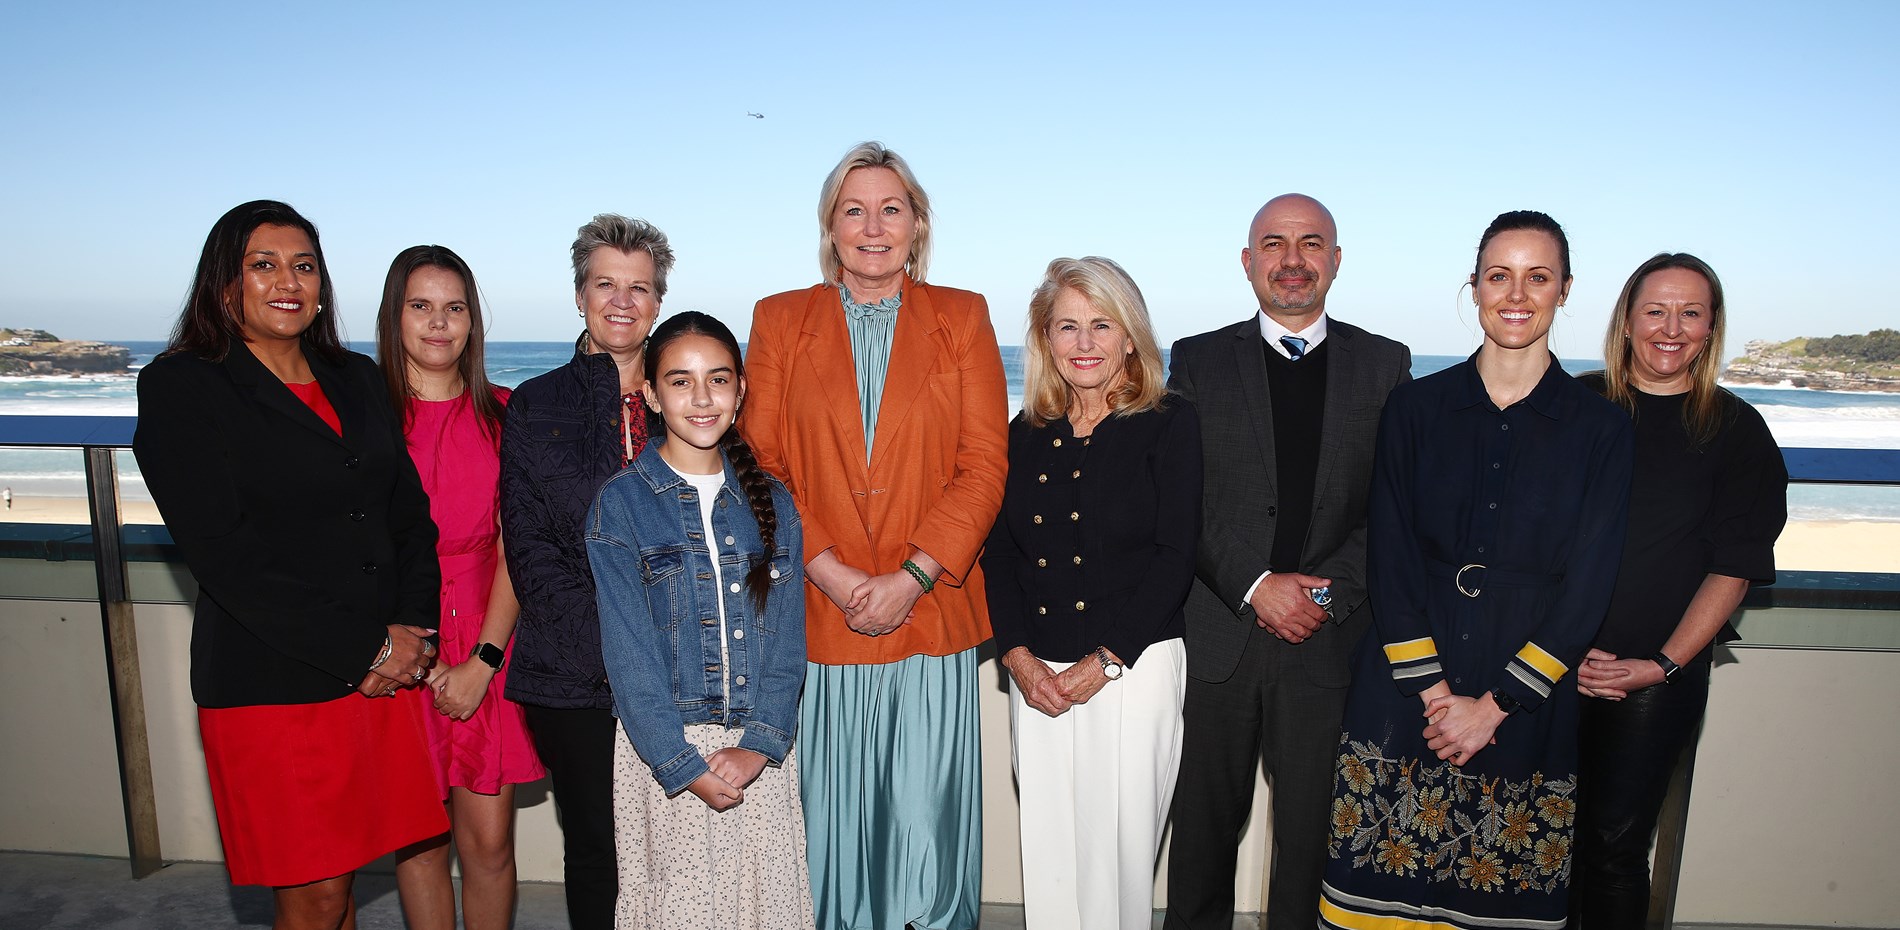 NSW celebrates the sporting leaders empowering women Main Image